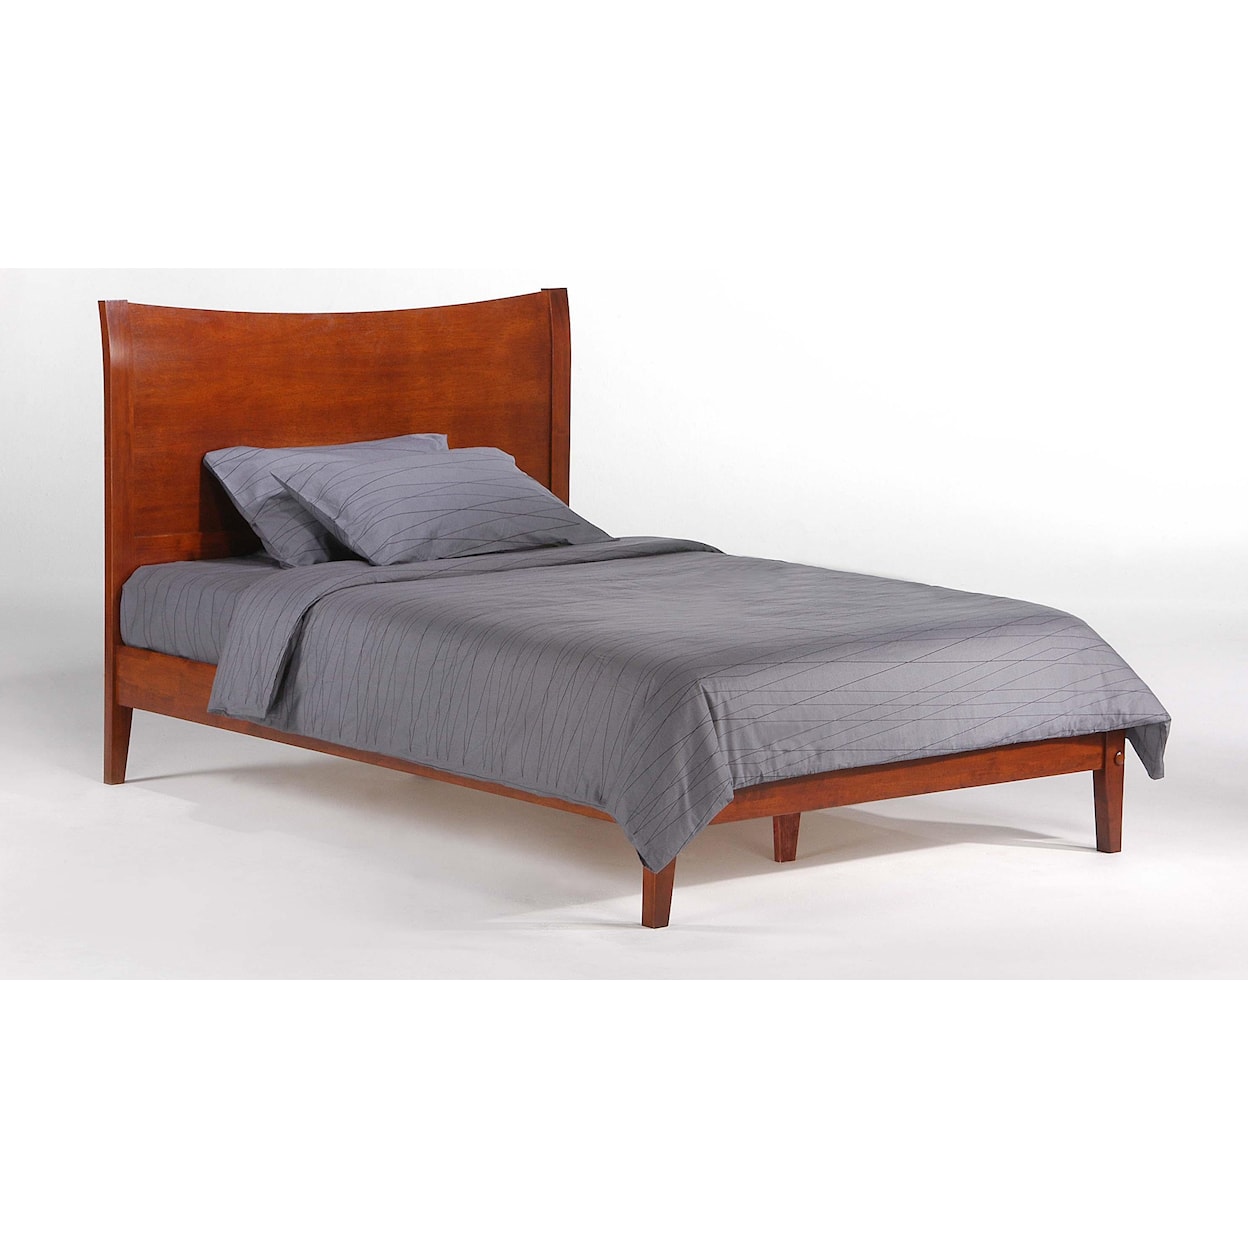 Pacific Manufacturing Blackpepper - Cherry Cal King Bed